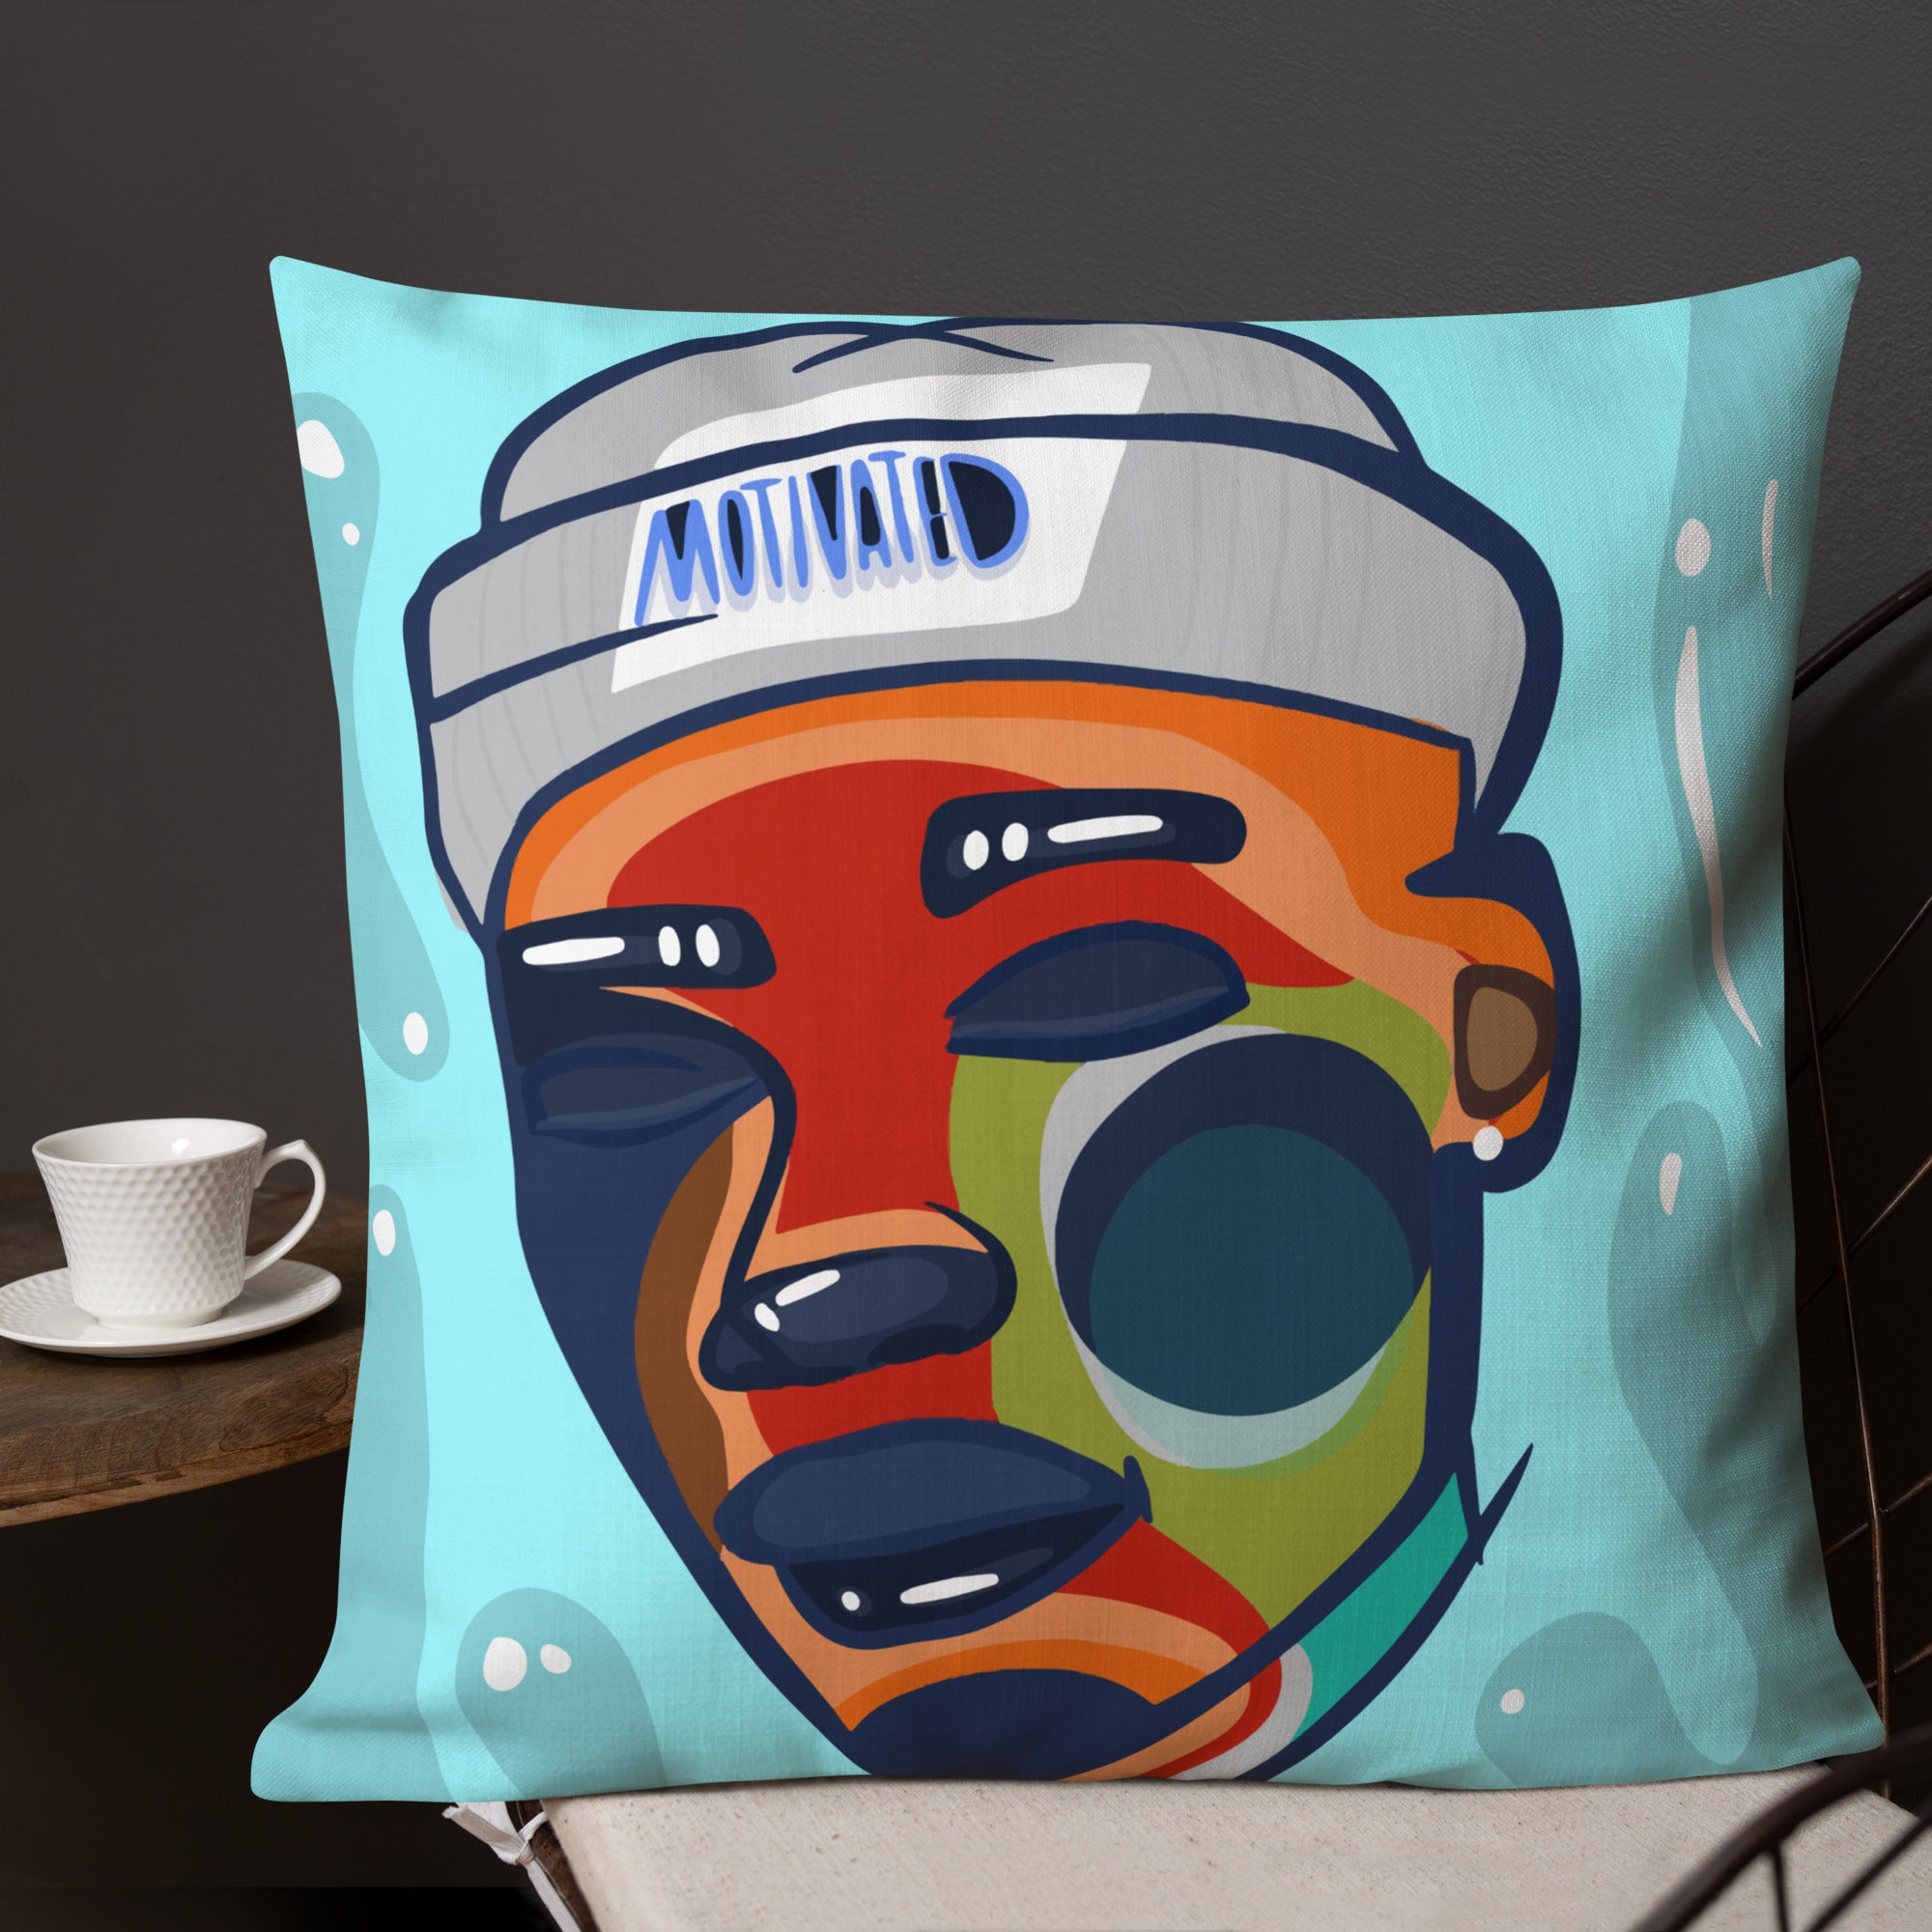 Motivated Throw Pillow